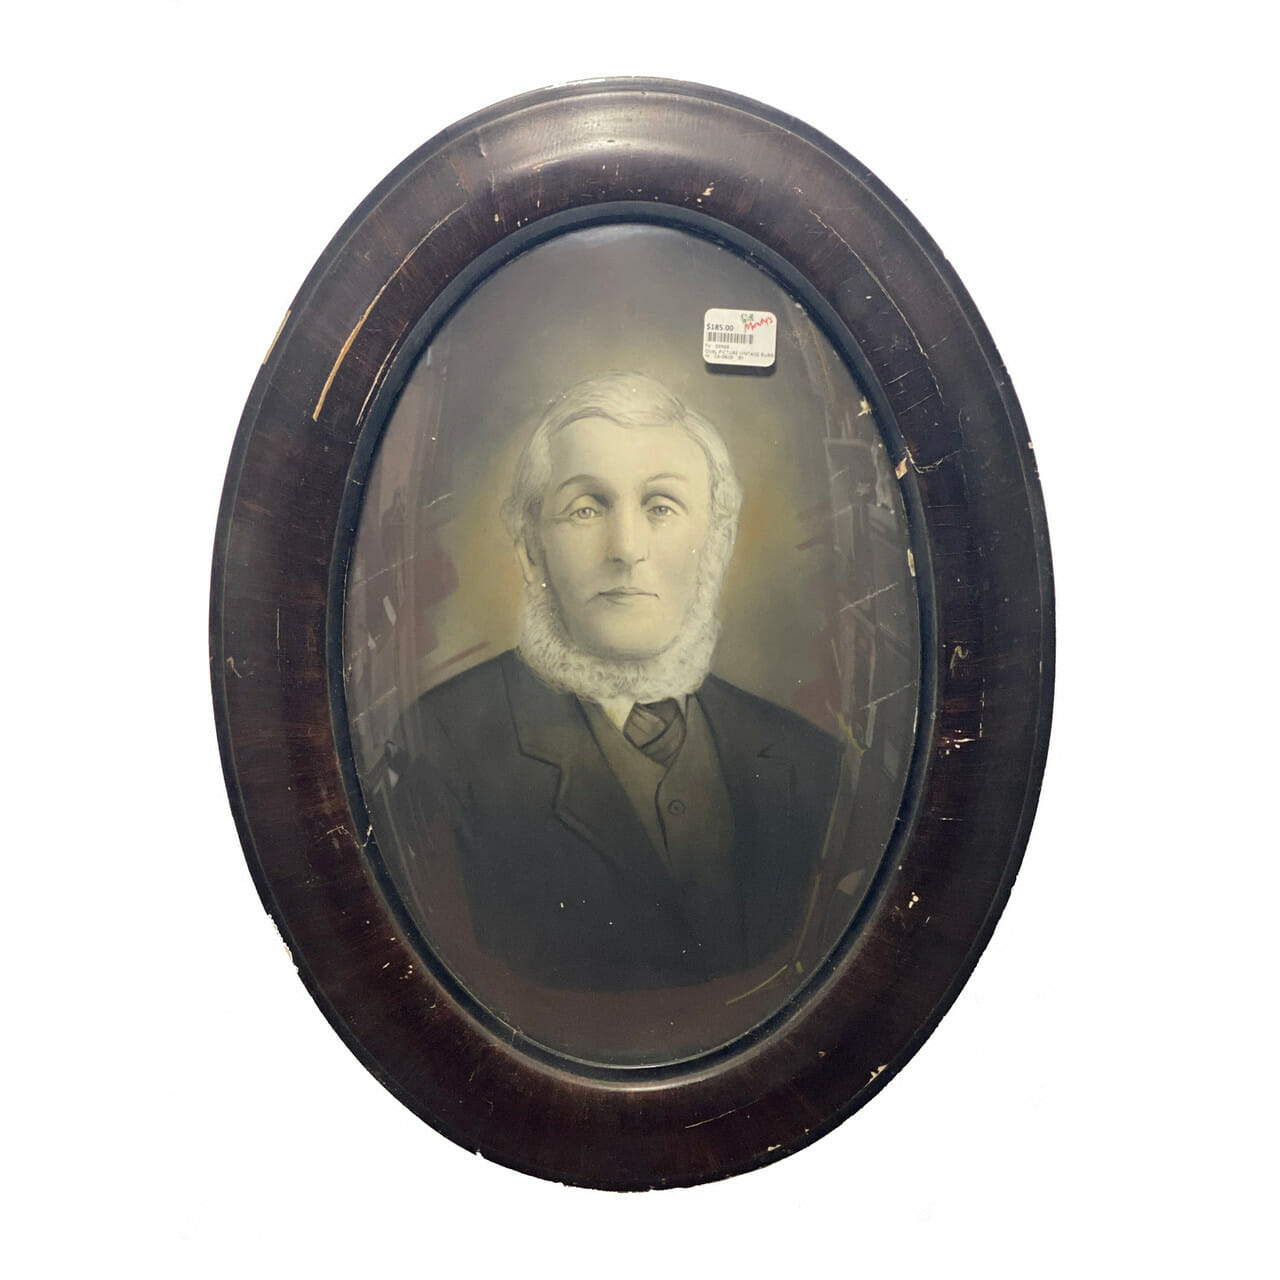 VINTAGE PICTURE OF A GENTLEMAN - BUBBLE GLASS - FRAMED #39966